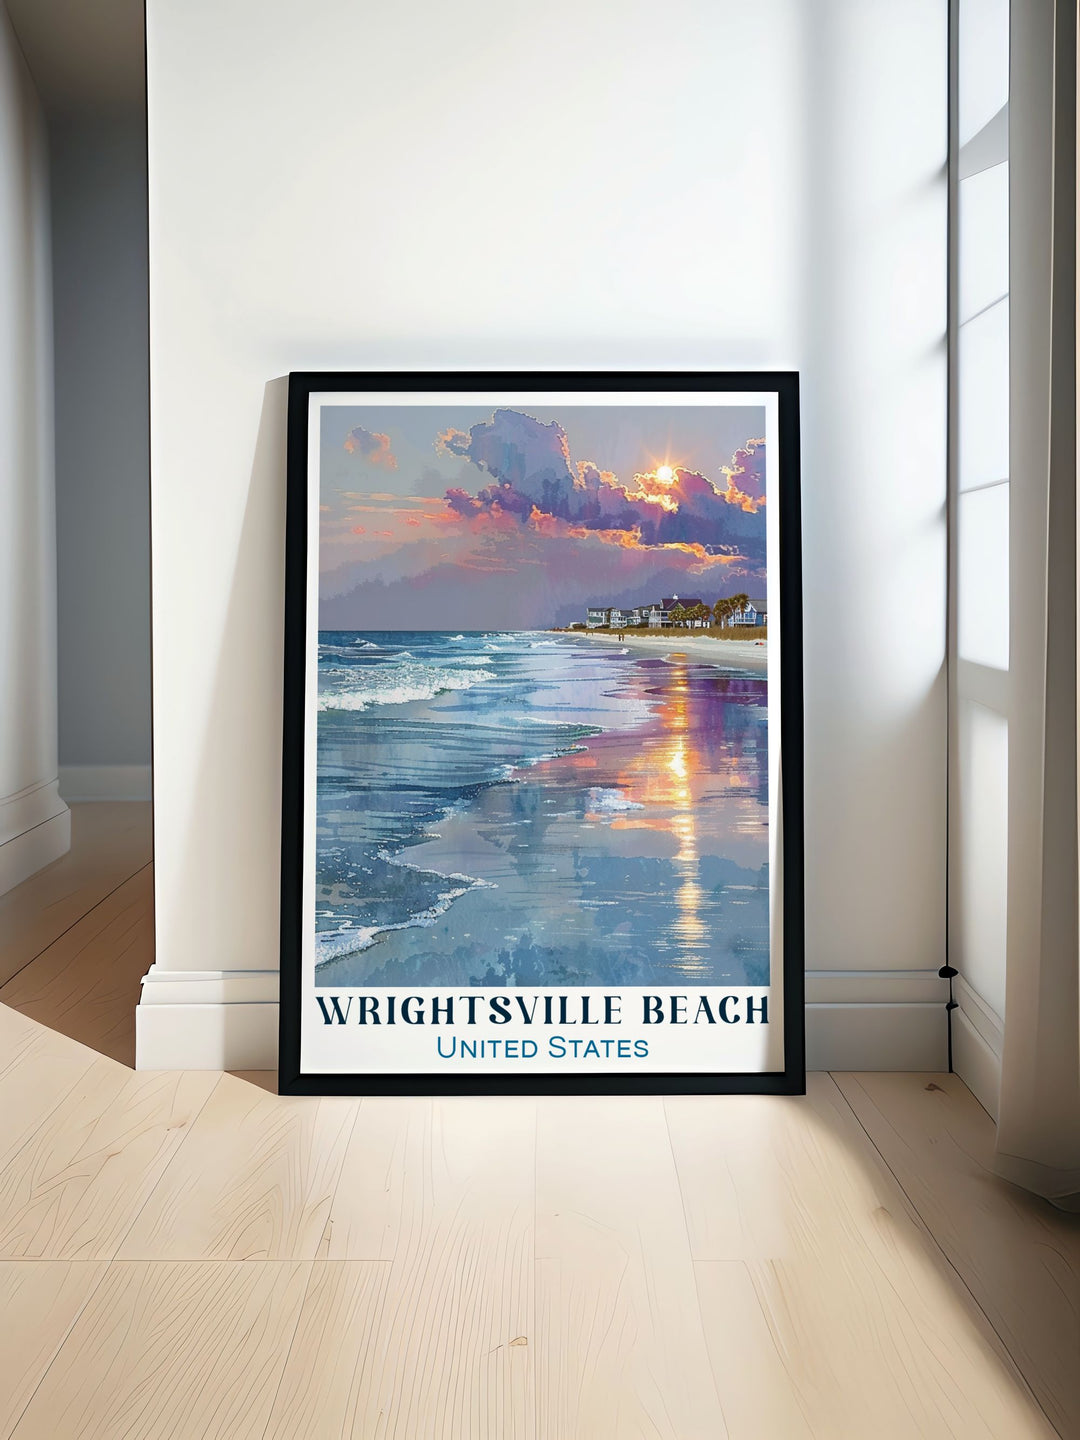 Personalized custom print of Wrightsville Beach, capturing the serene beauty and lively spirit of this coastal gem. Ideal for creating a unique piece of art that reflects your love for North Carolinas pristine beaches and vibrant communities.